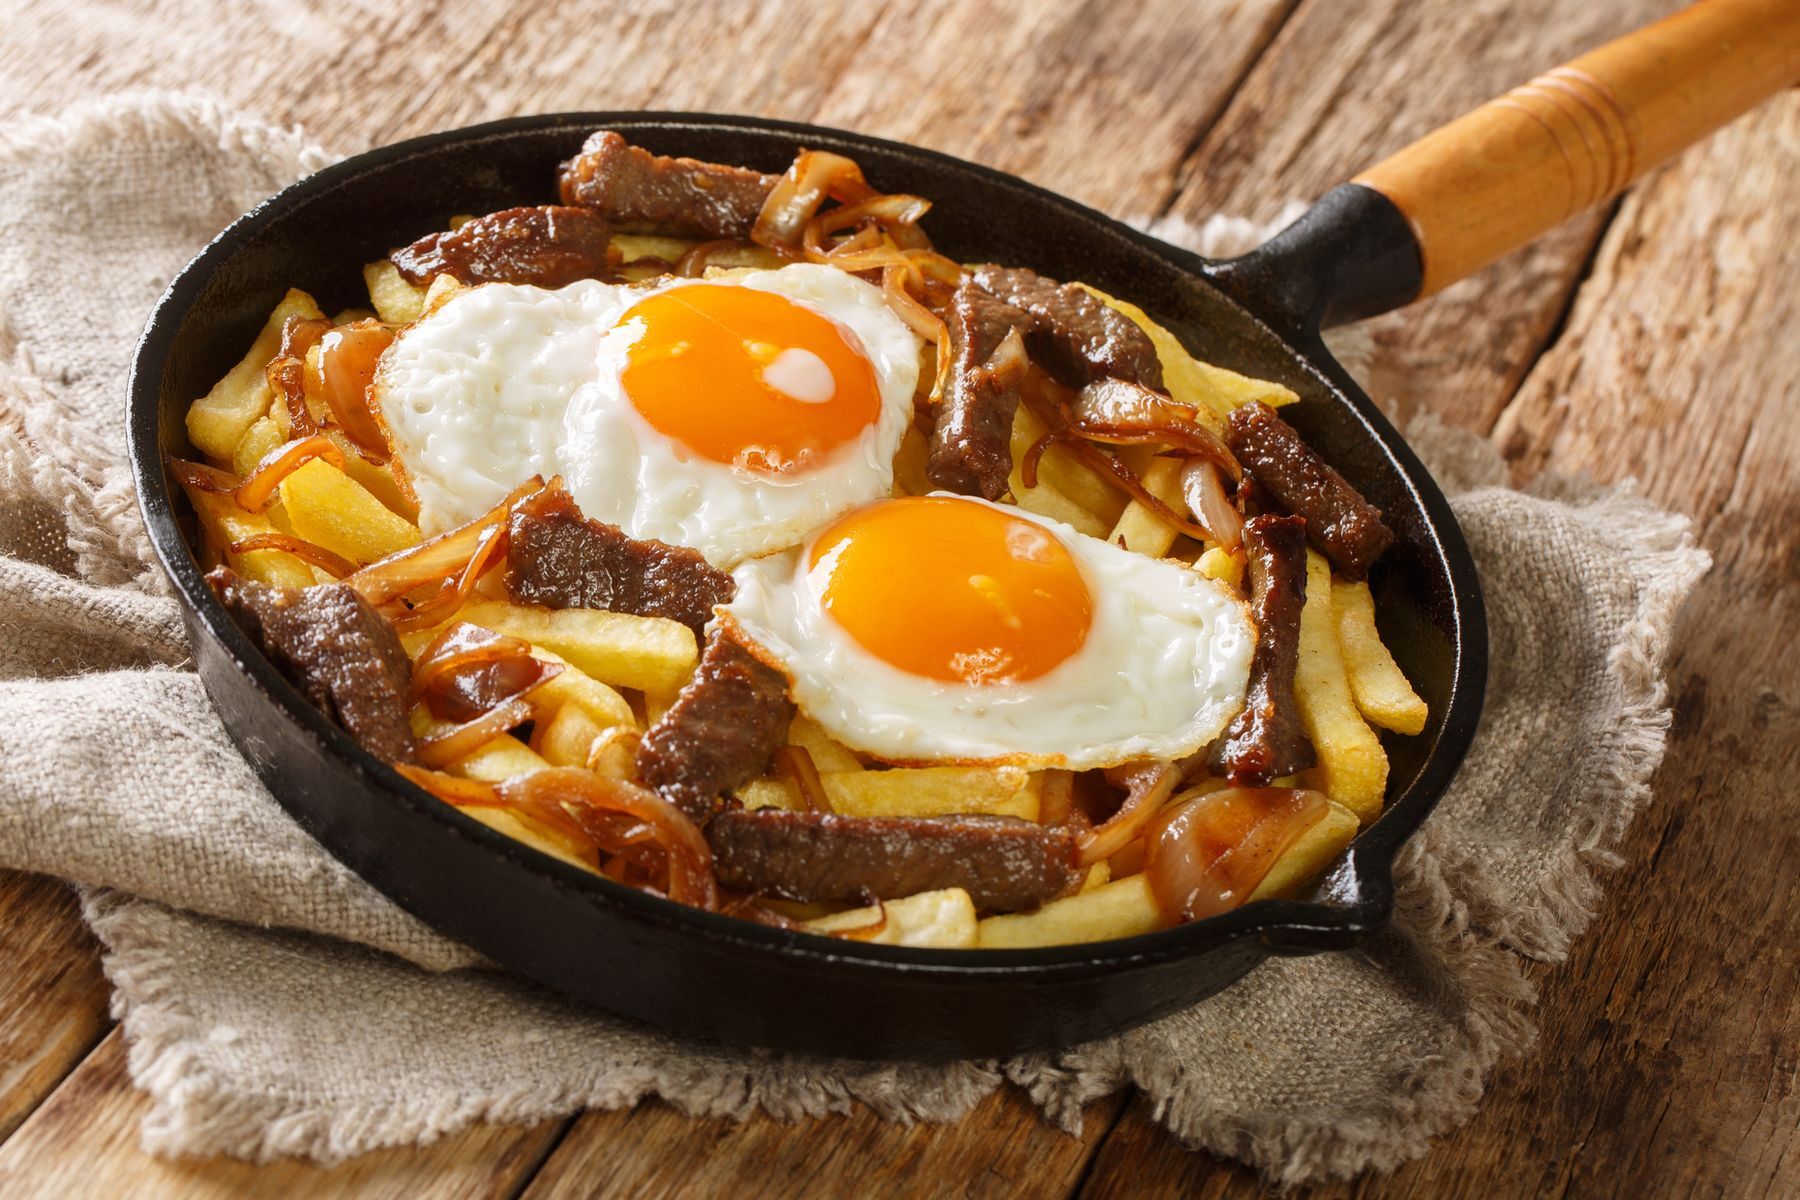 <p><a href="https://blog.amigofoods.com/index.php/chilean-foods/chorrillana/">Chorrillana is to Chile</a> what poutine is to Quebec. Sliced meat, caramelized onions, and fried eggs top a mountain of fresh fries.</p>